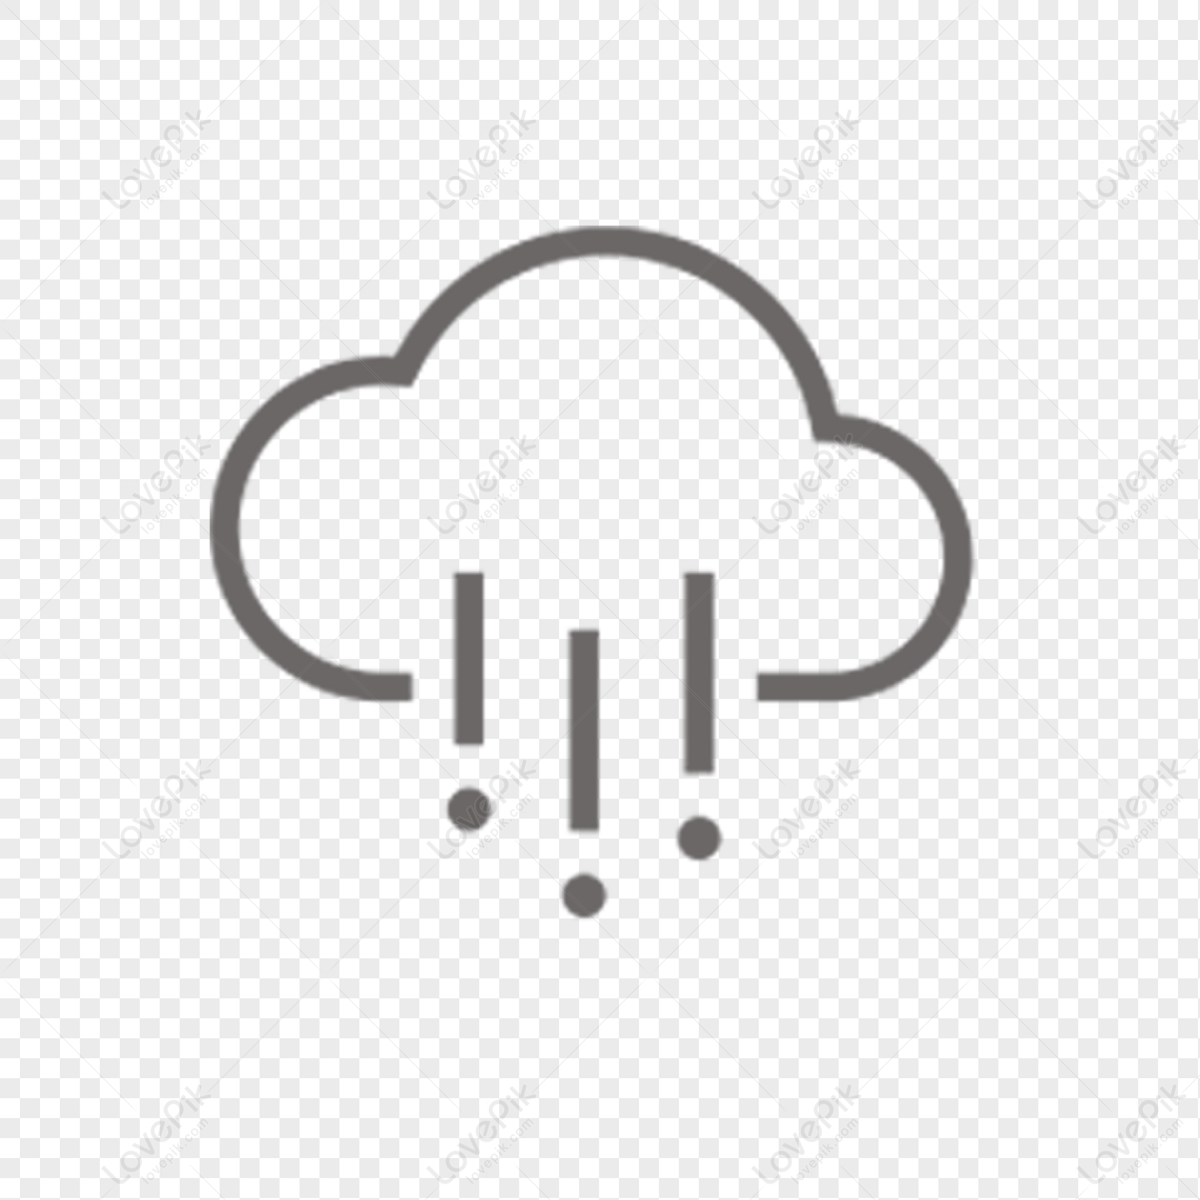 Weather Icons Free PNG And Clipart Image For Free Download - Lovepik ...